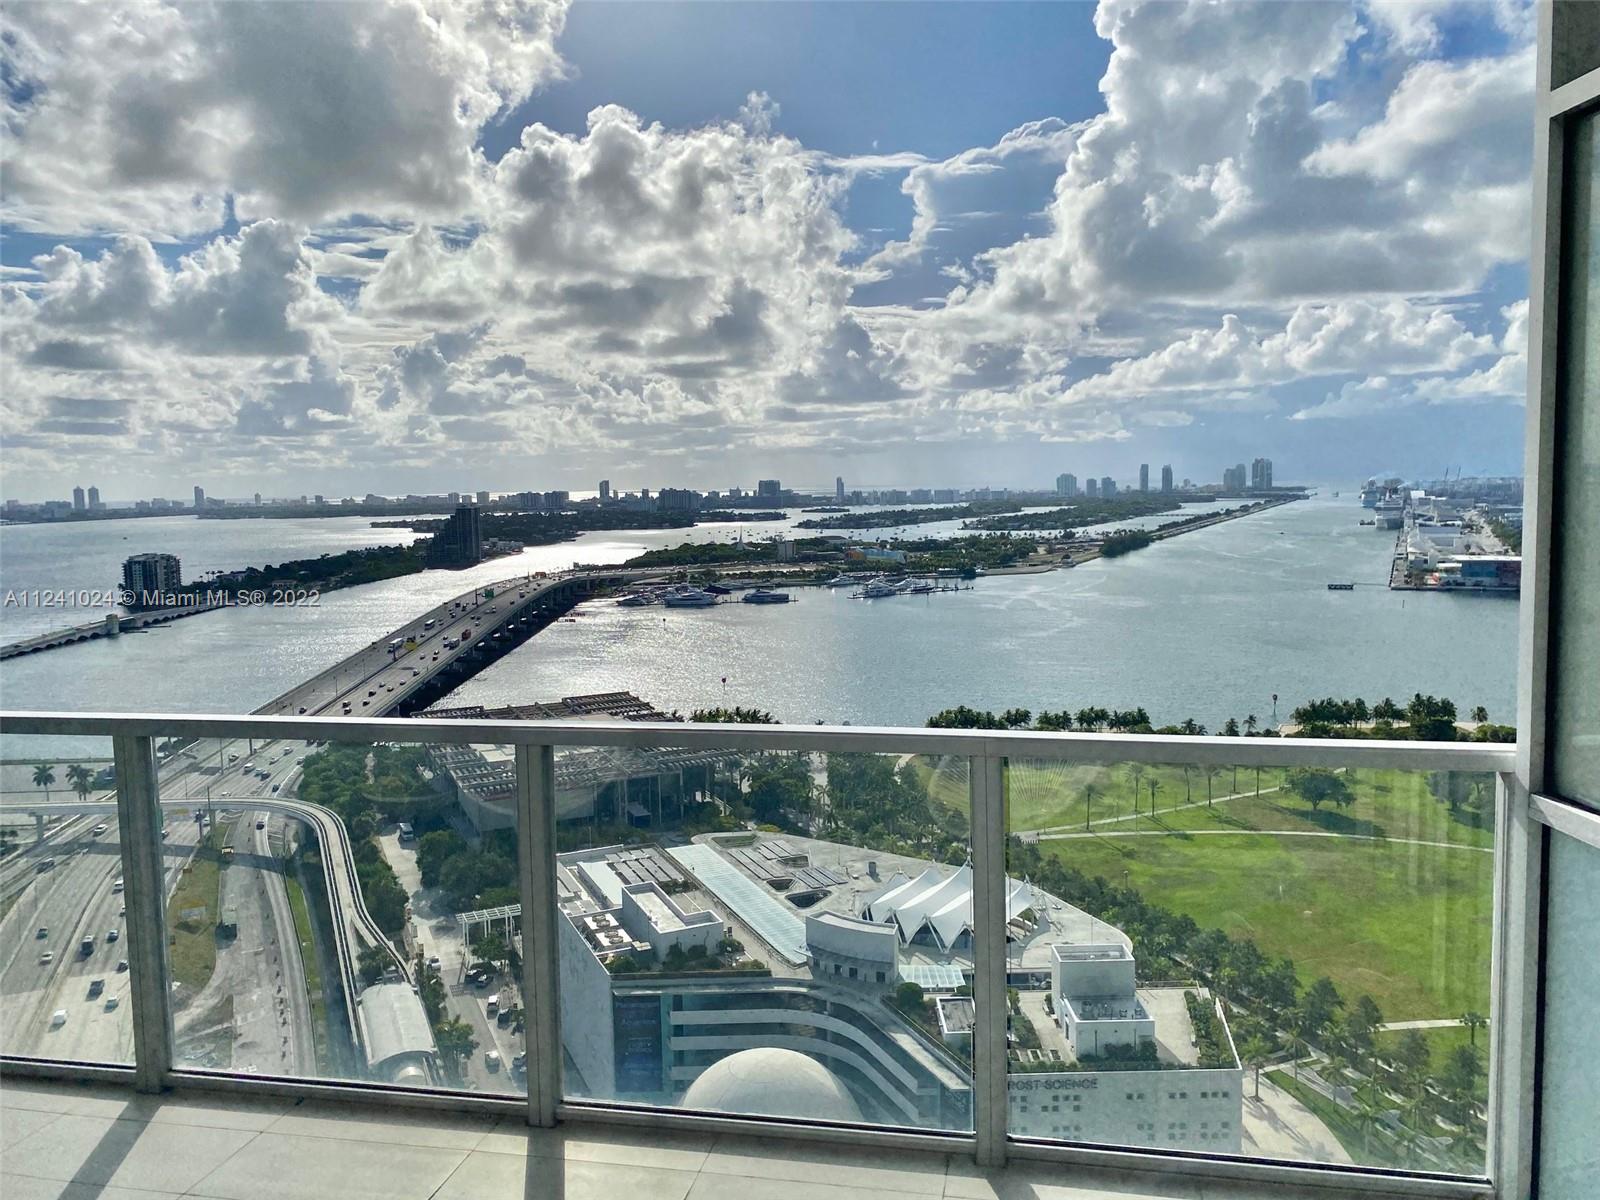 Modern 2-story Loft style 1Bdr + Den | 2 Bath in luxury building. Den closed and used as an office. Unobstructed views of Biscayne Bay- Port of Miami. 20" high ceilings and oversized balcony. Railing was updated to Glass on 2nd floor & stairs. Top of the line appliances, 5 star amenities including Valet, 24hr doorman, lounge, Sky Pool Deck & Spa. Rented until 08/20/23.